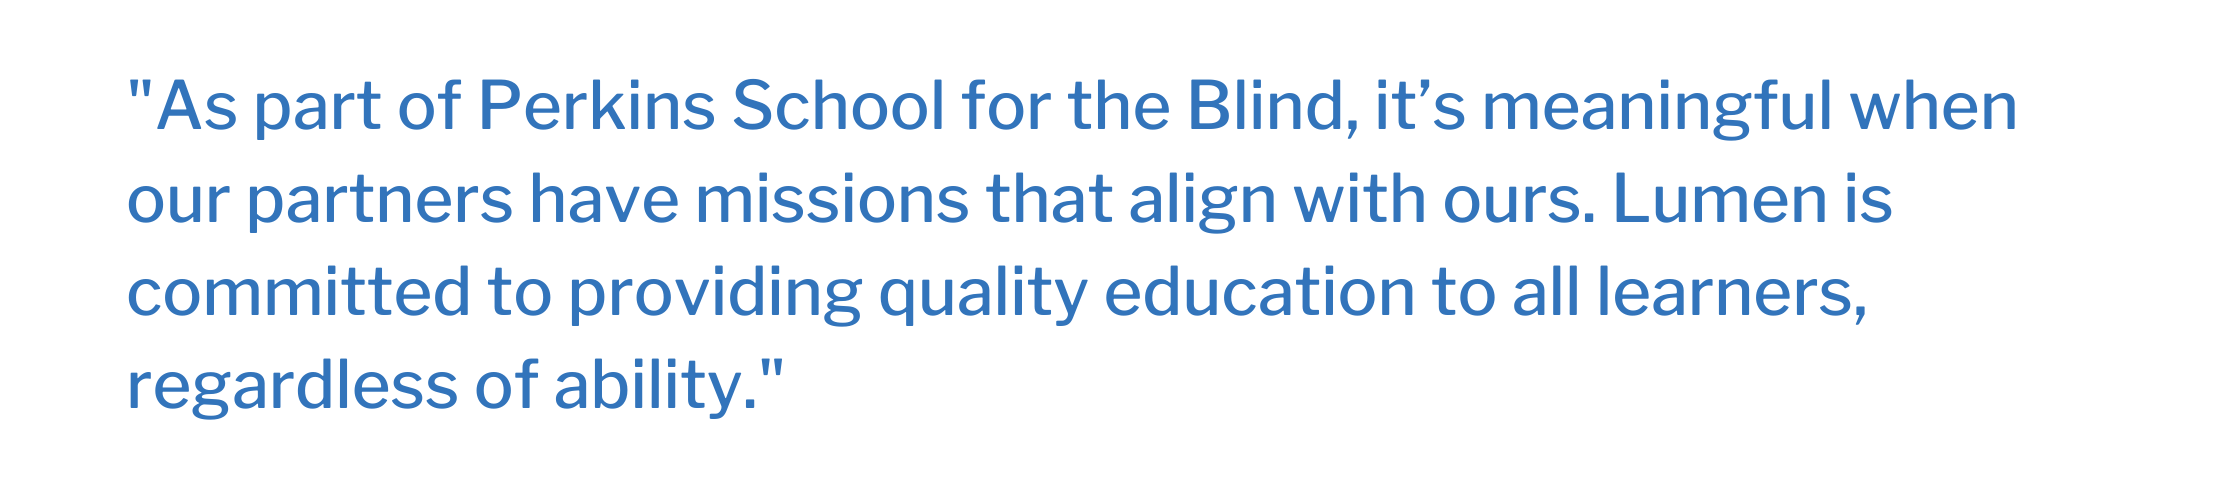 As part of Perkins School for the Blind, it’s meaningful when our partners have missions that align with ours. Lumen is committed to providing quality education to all learners, regardless of ability